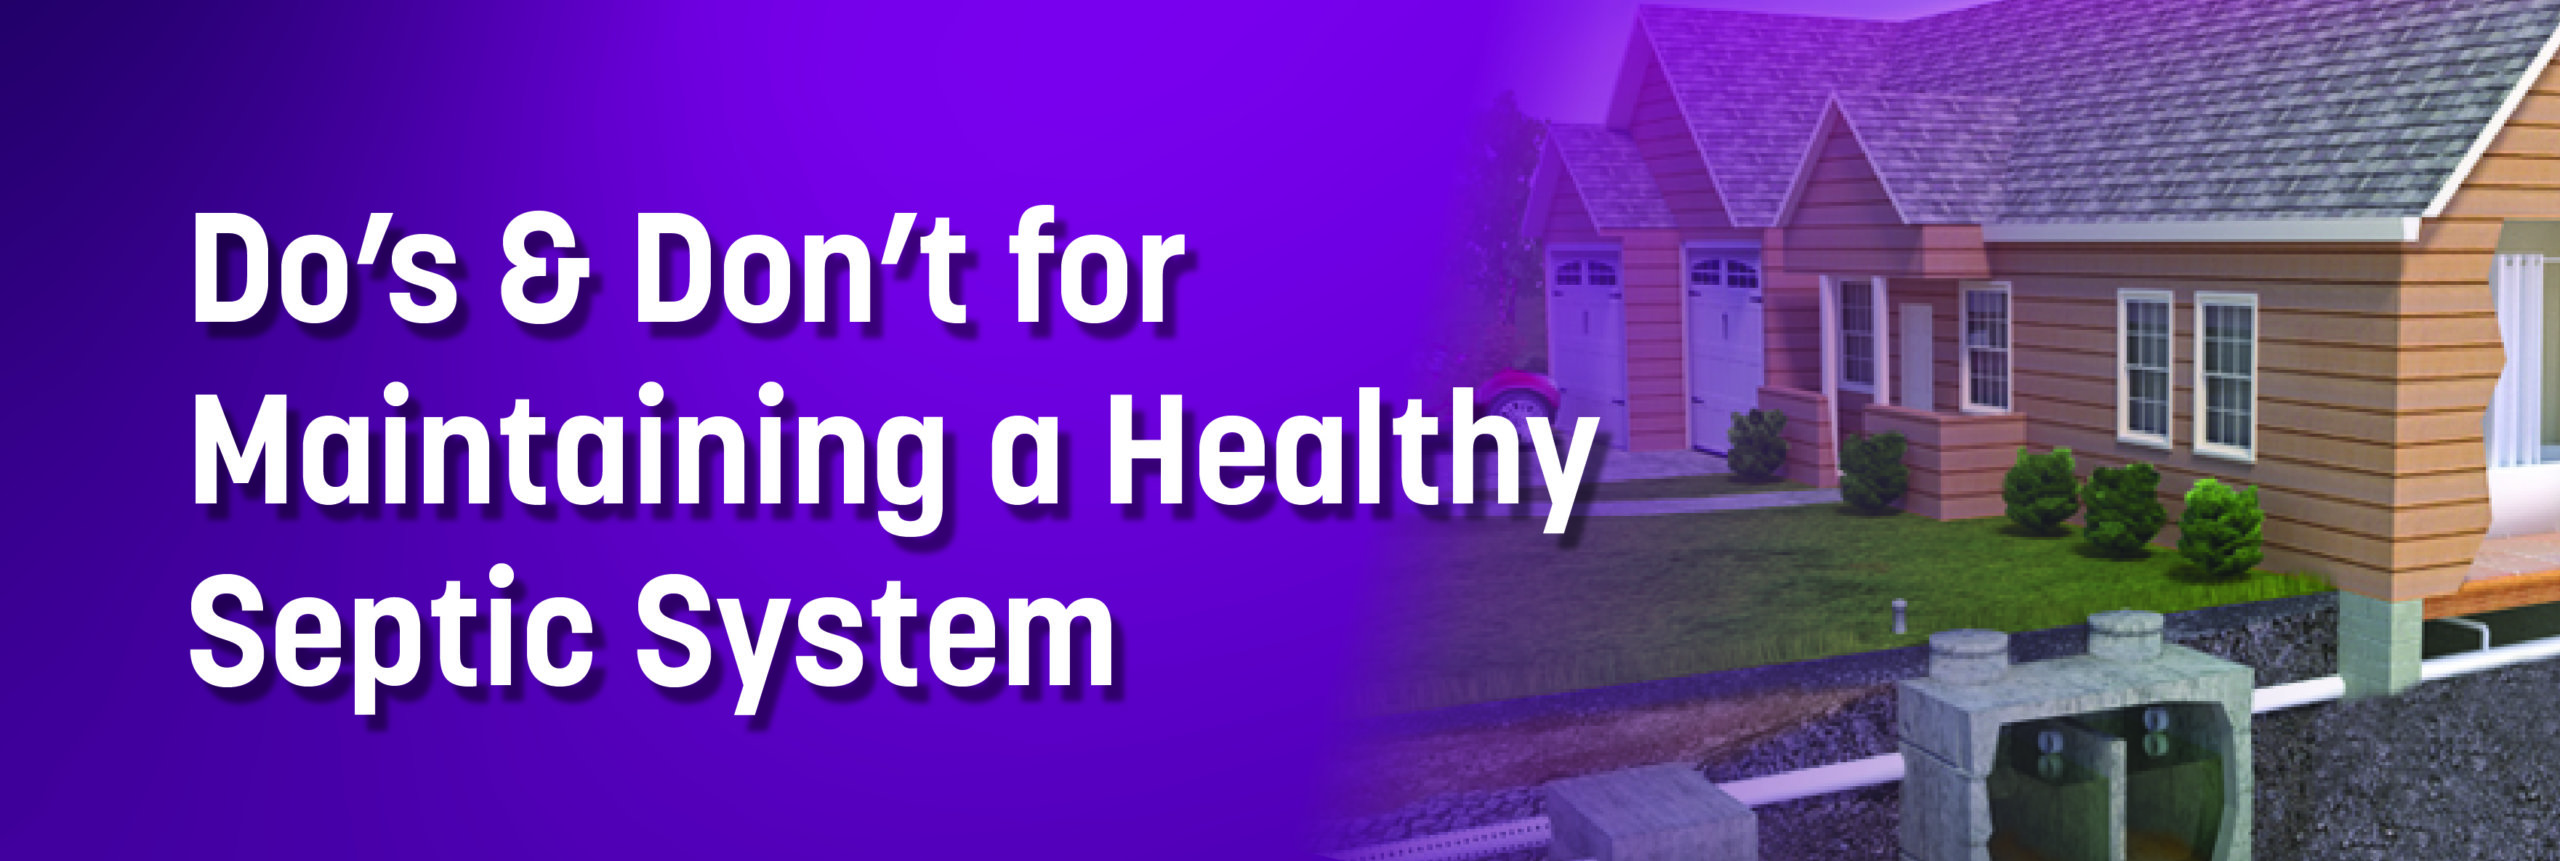 Dos & Don’t for Maintaining a Healthy Septic System